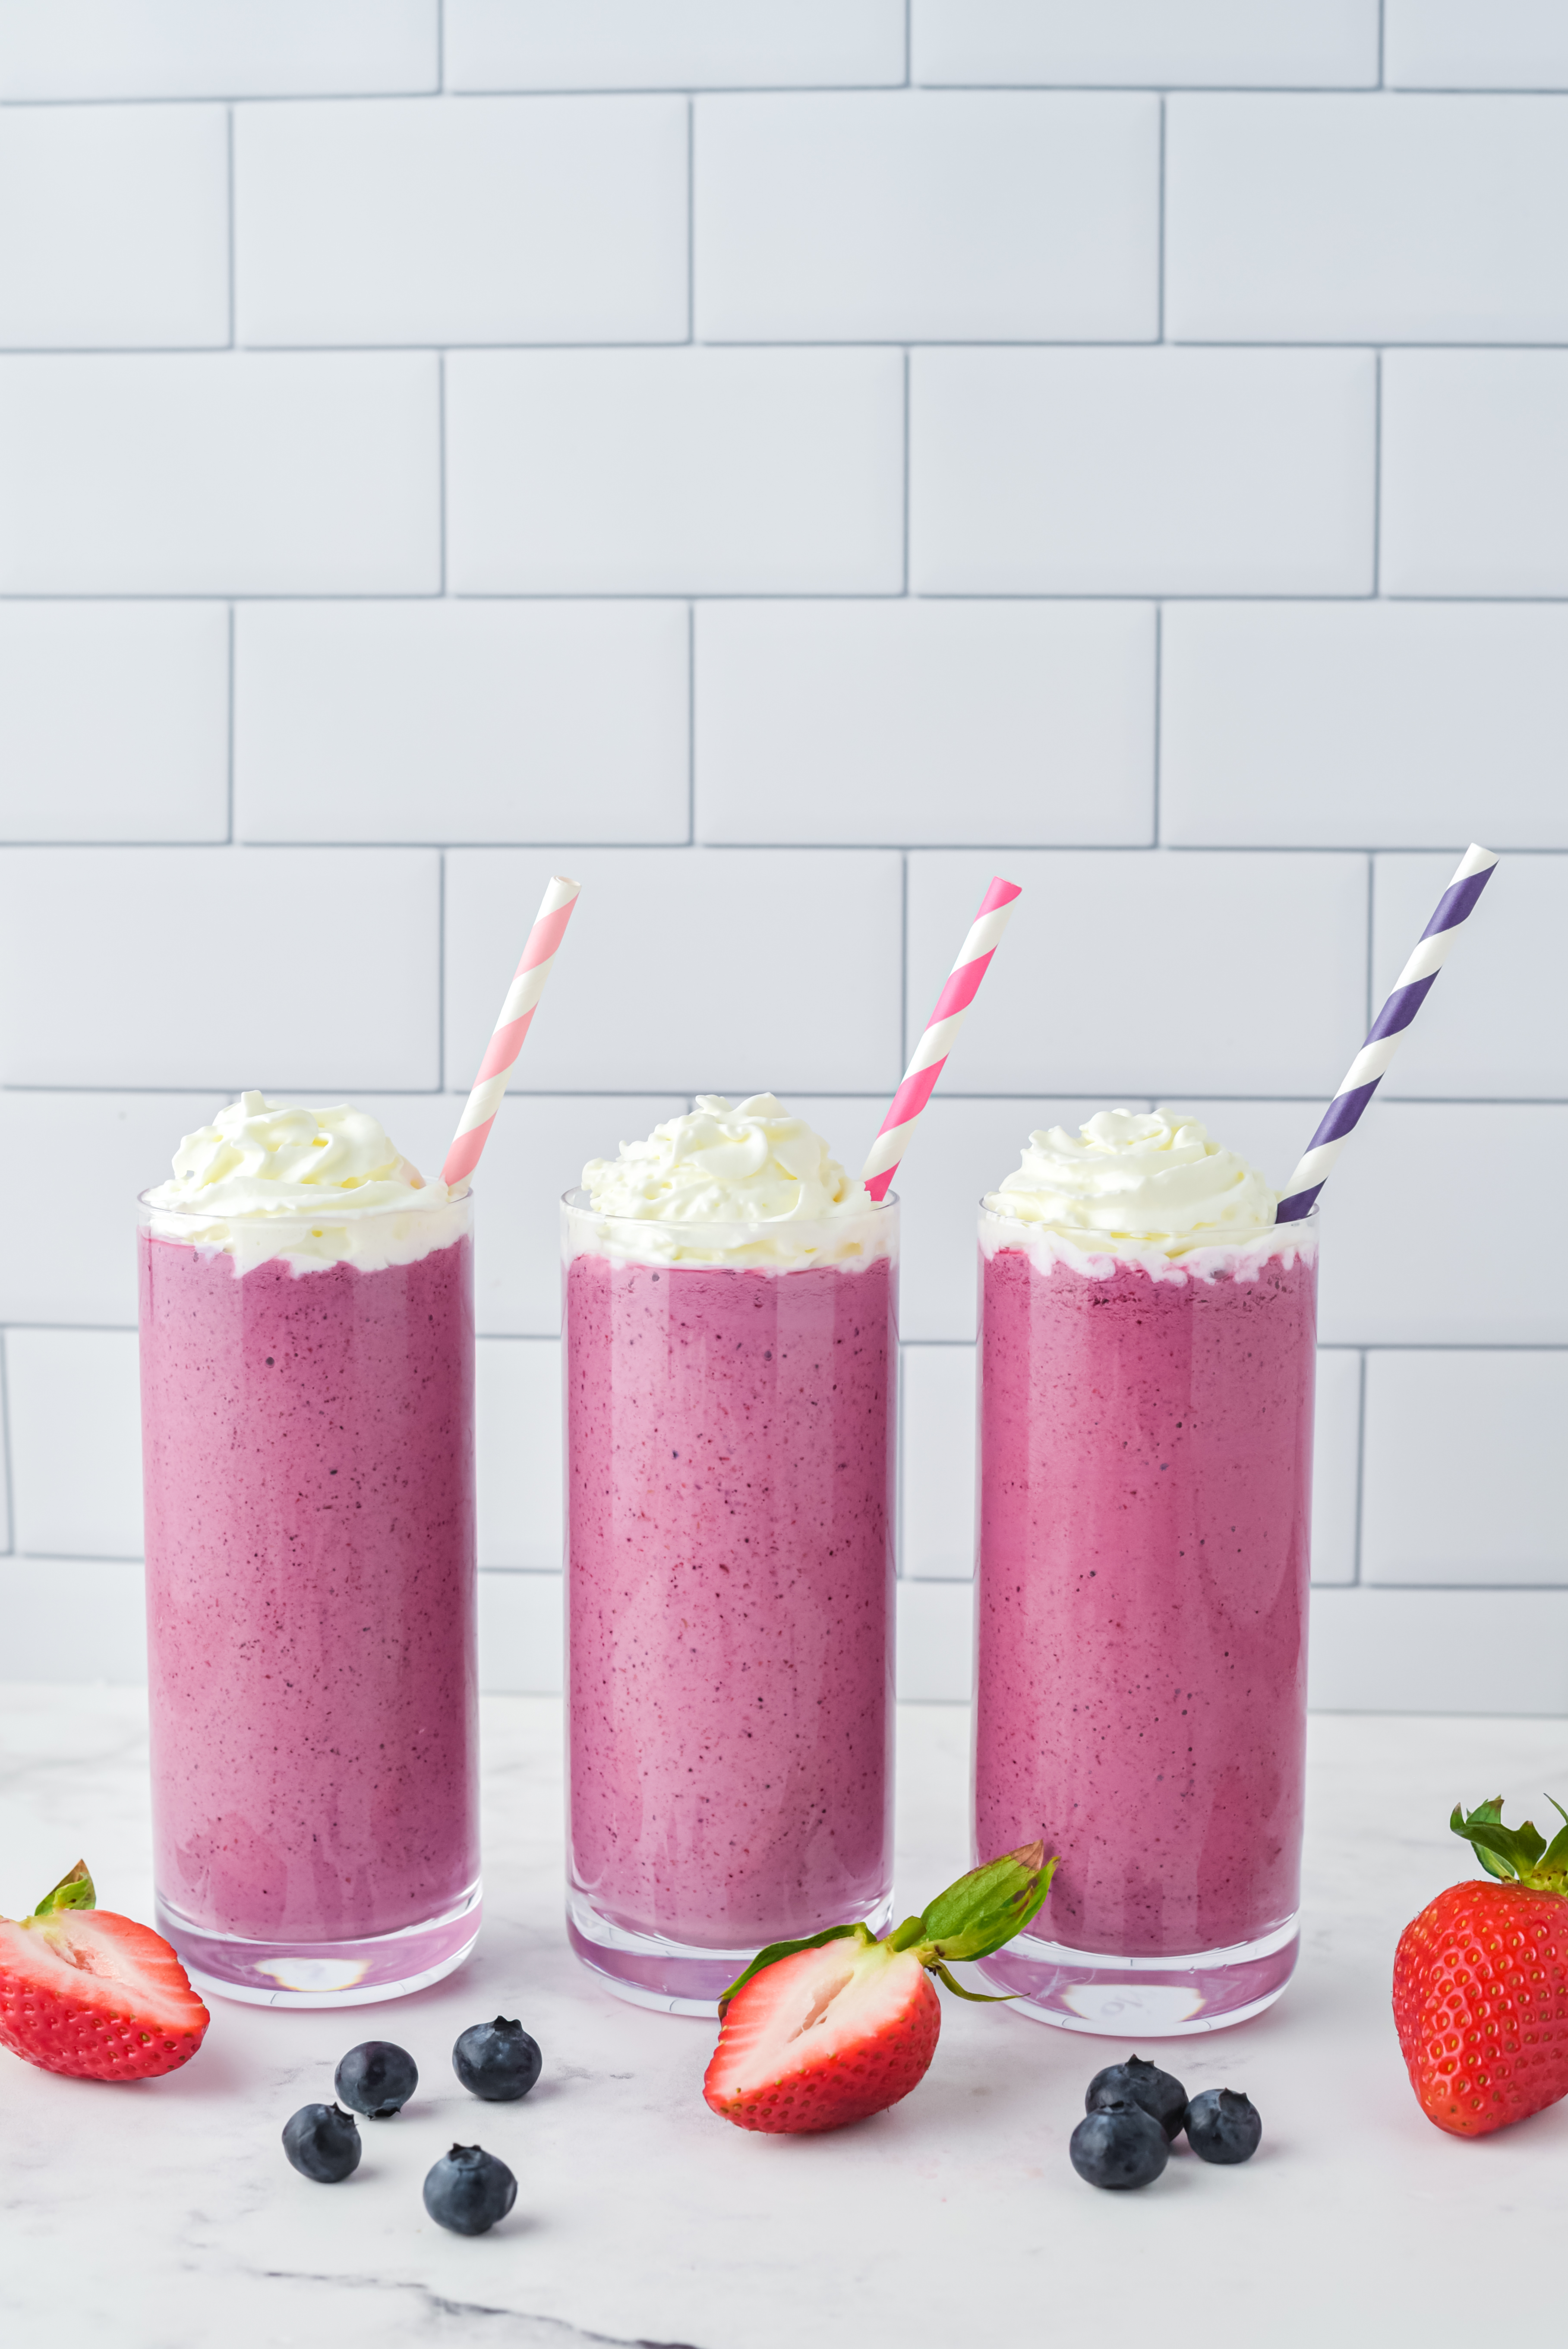 Three glasses with pink berry smoothie mix in them, stripy straws in the top, and chopped berries on the white table around the glasses.